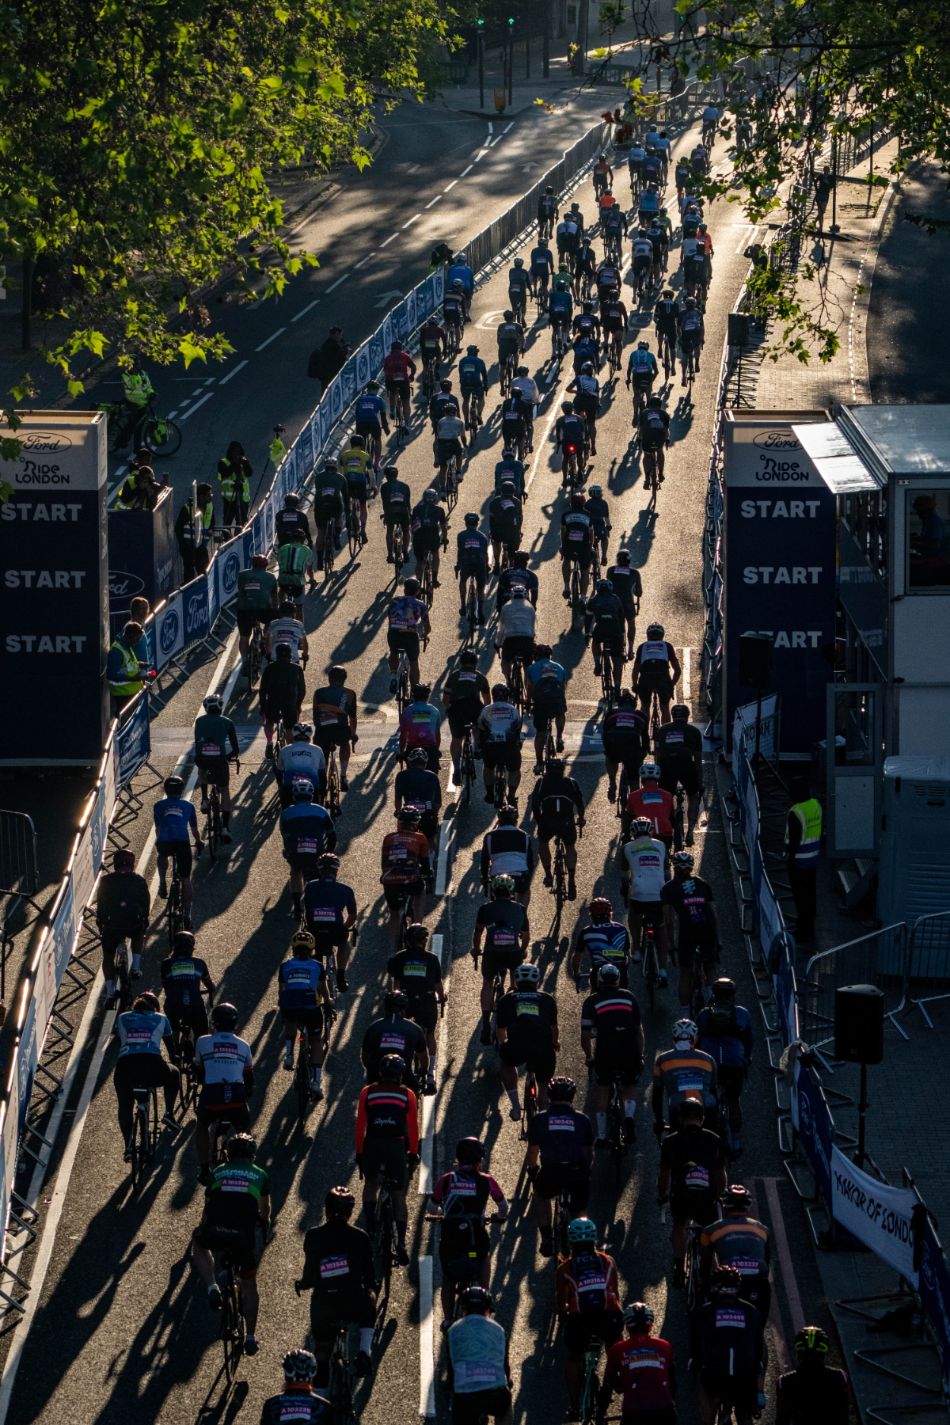 A group of cyclists at RideLondon pictured at sunset